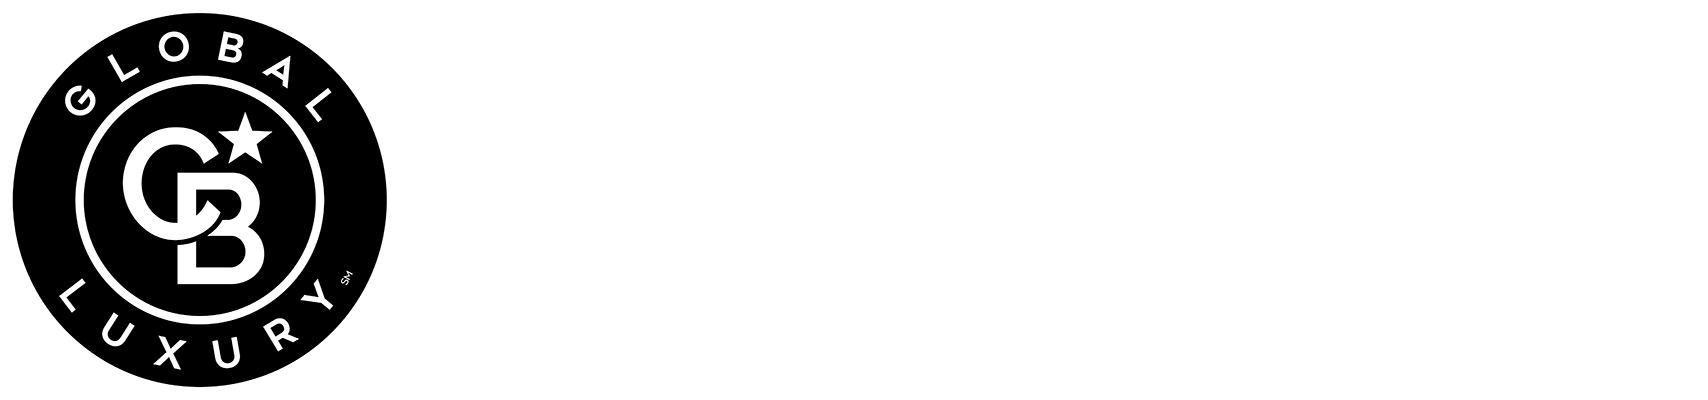 Coldwell Banker Mountain Properties